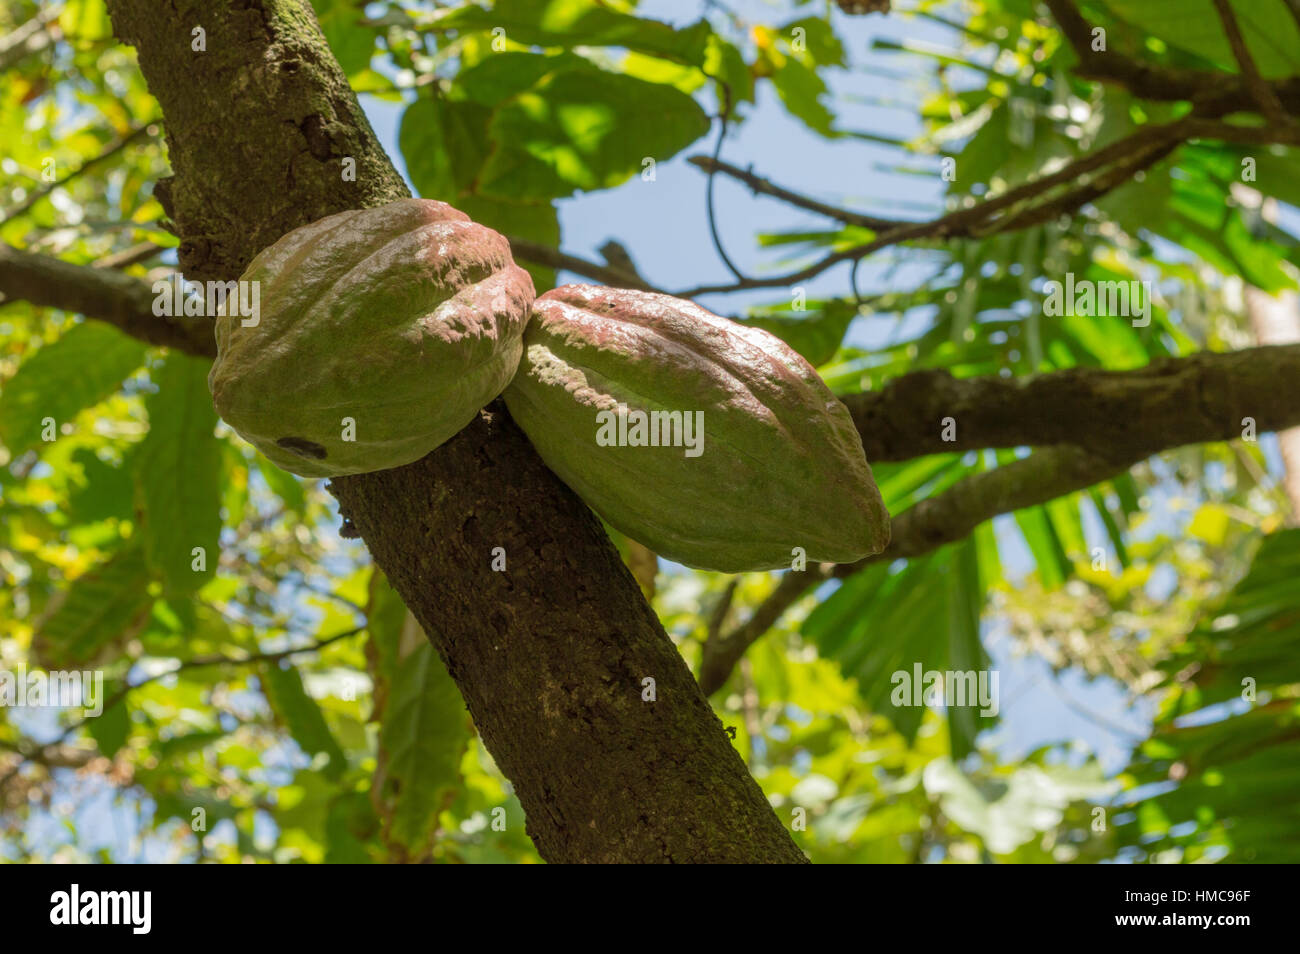 2 cocoa pods growing in Saint Lucia for making chocolate Stock Photo